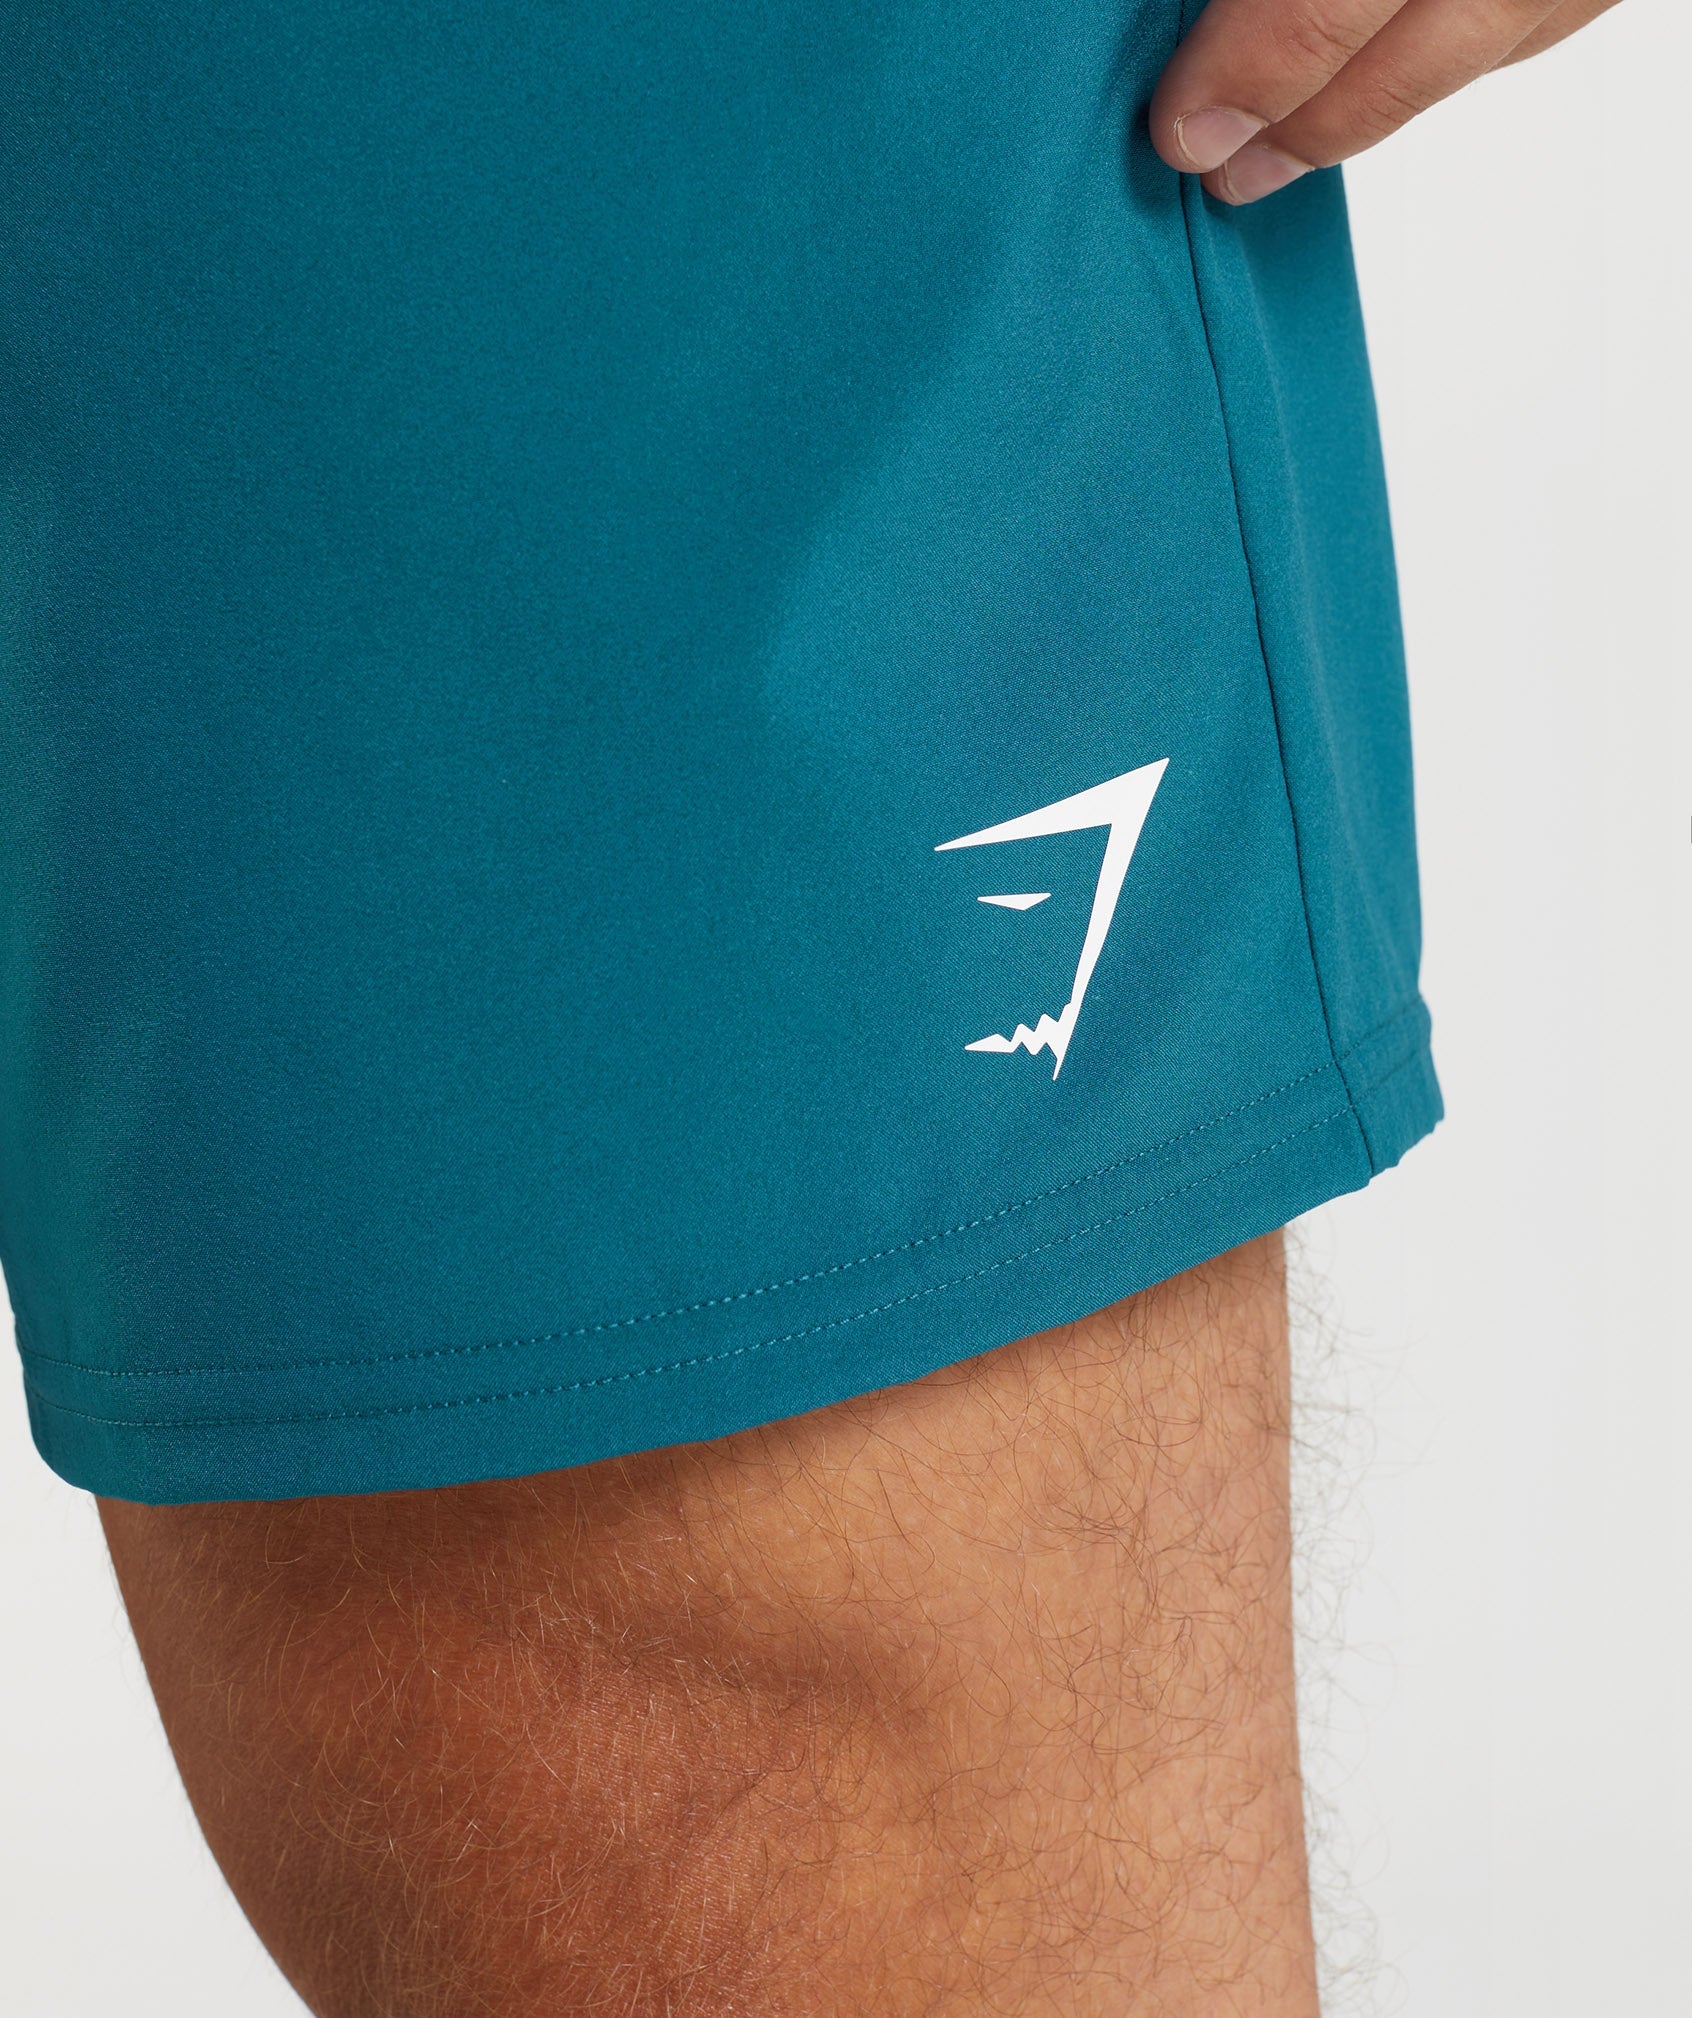 Arrival 7" Shorts in Atlantic Blue - view 3